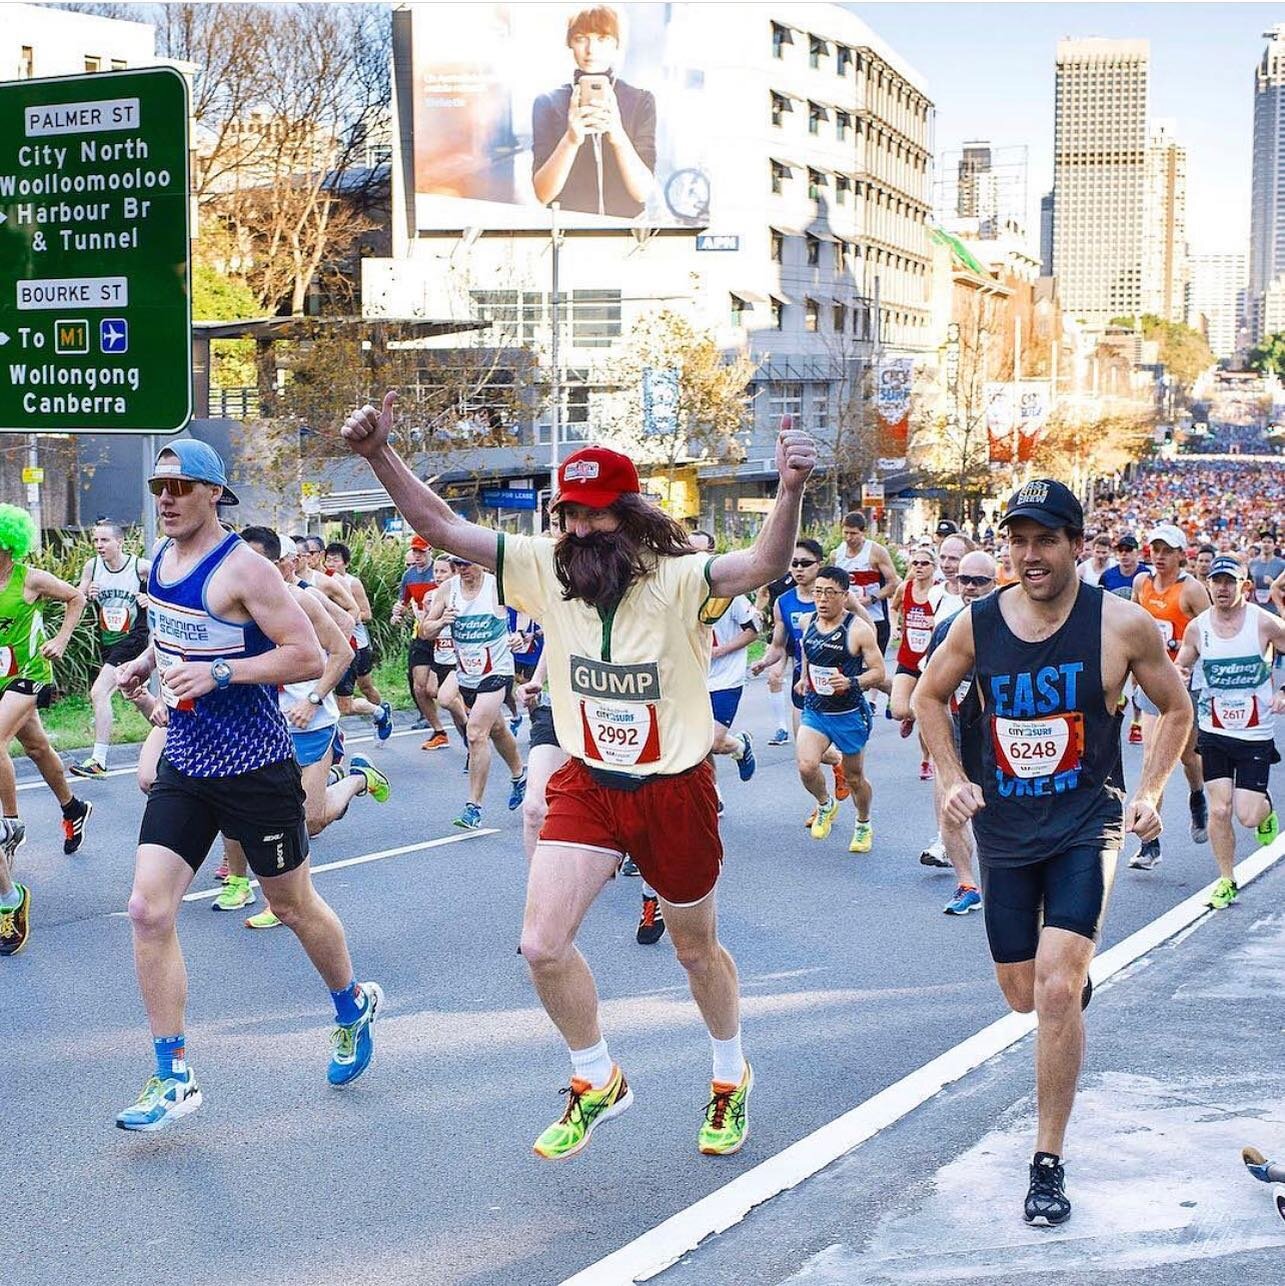 #city2surf week two tomorrow 5 June. 2km loops. &ldquo;Behave&rdquo; tonight 😉 😇. See ya&rsquo;ll in the morning.
.
Check out @hendizzi our advance coach leading it from the front of the pack like the legend he is. 😍